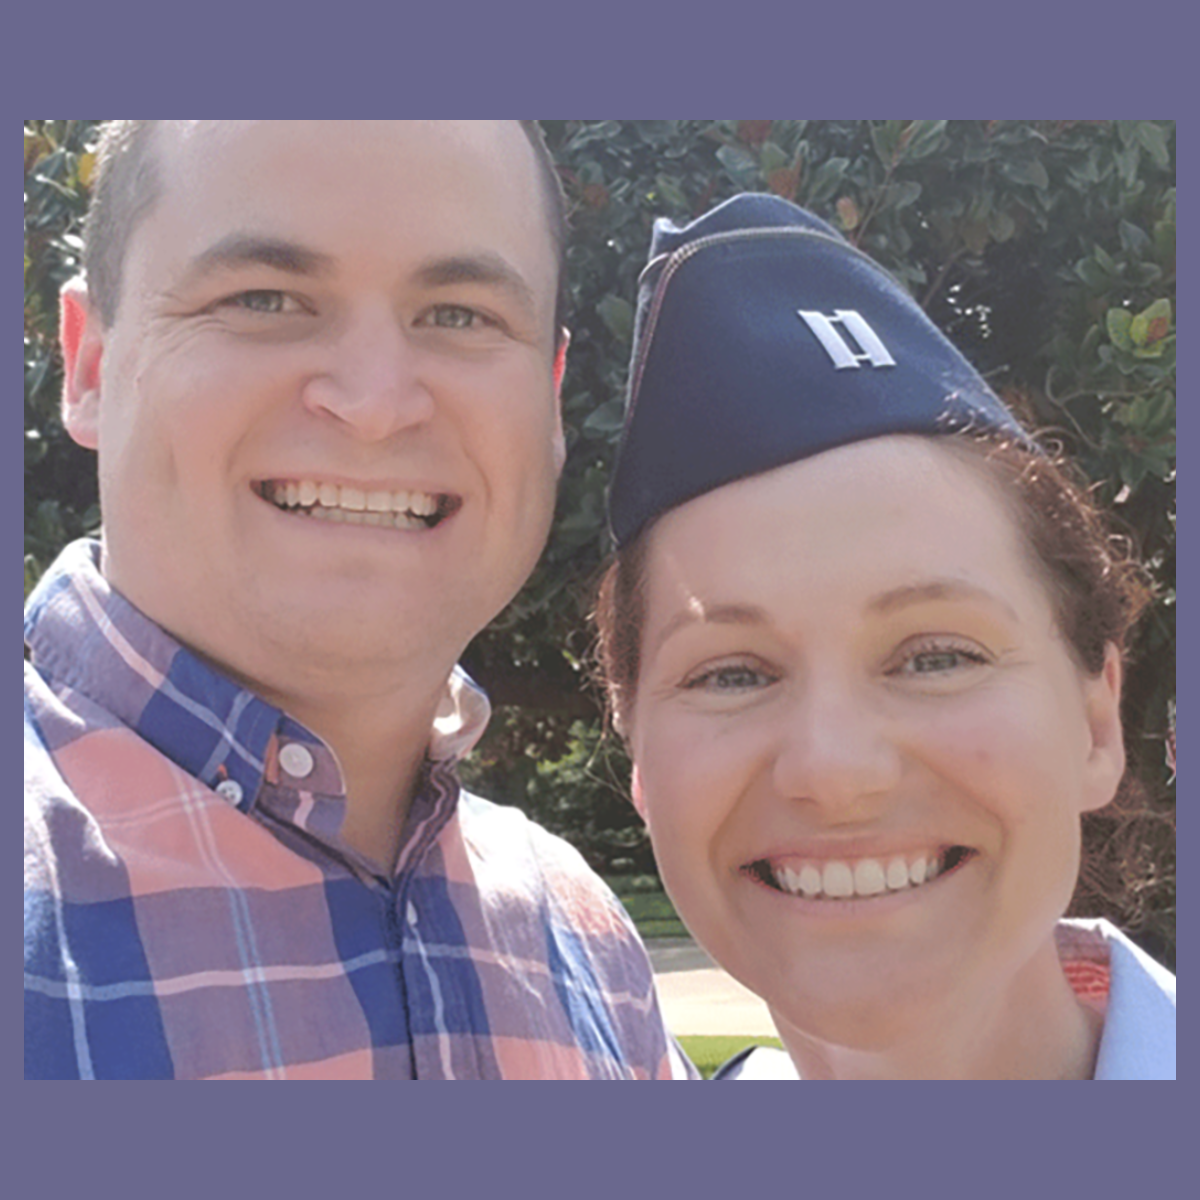 Photo of a man and a woman, both veterans with one in uniform, smiling for a selfie together